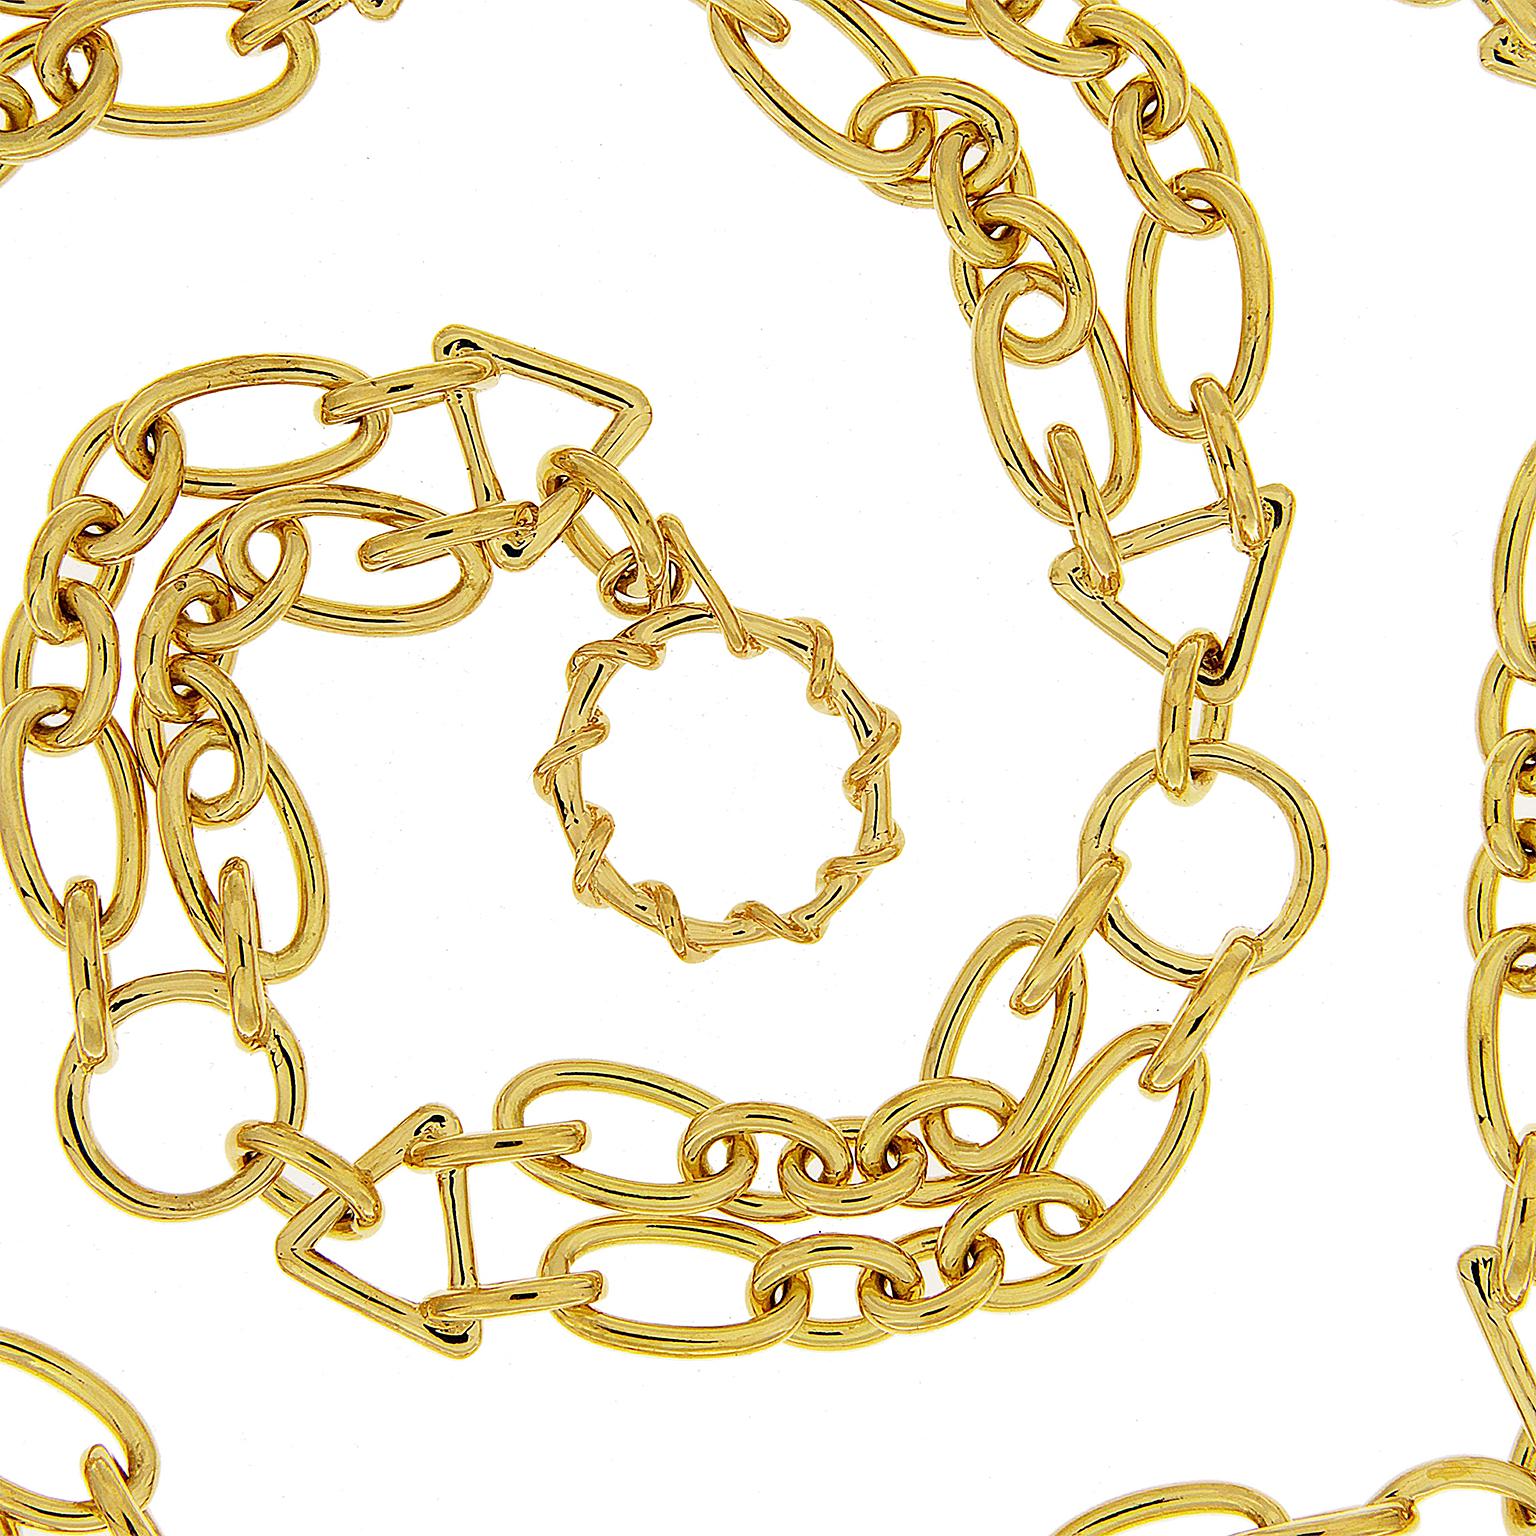 18k yellow gold geometric shapes in a pair create this memorable interpretation of a chain necklace. A circle connects to two rows of an oval, three smaller circle links, and another oval with a triangle link at the end. The pattern continues. A